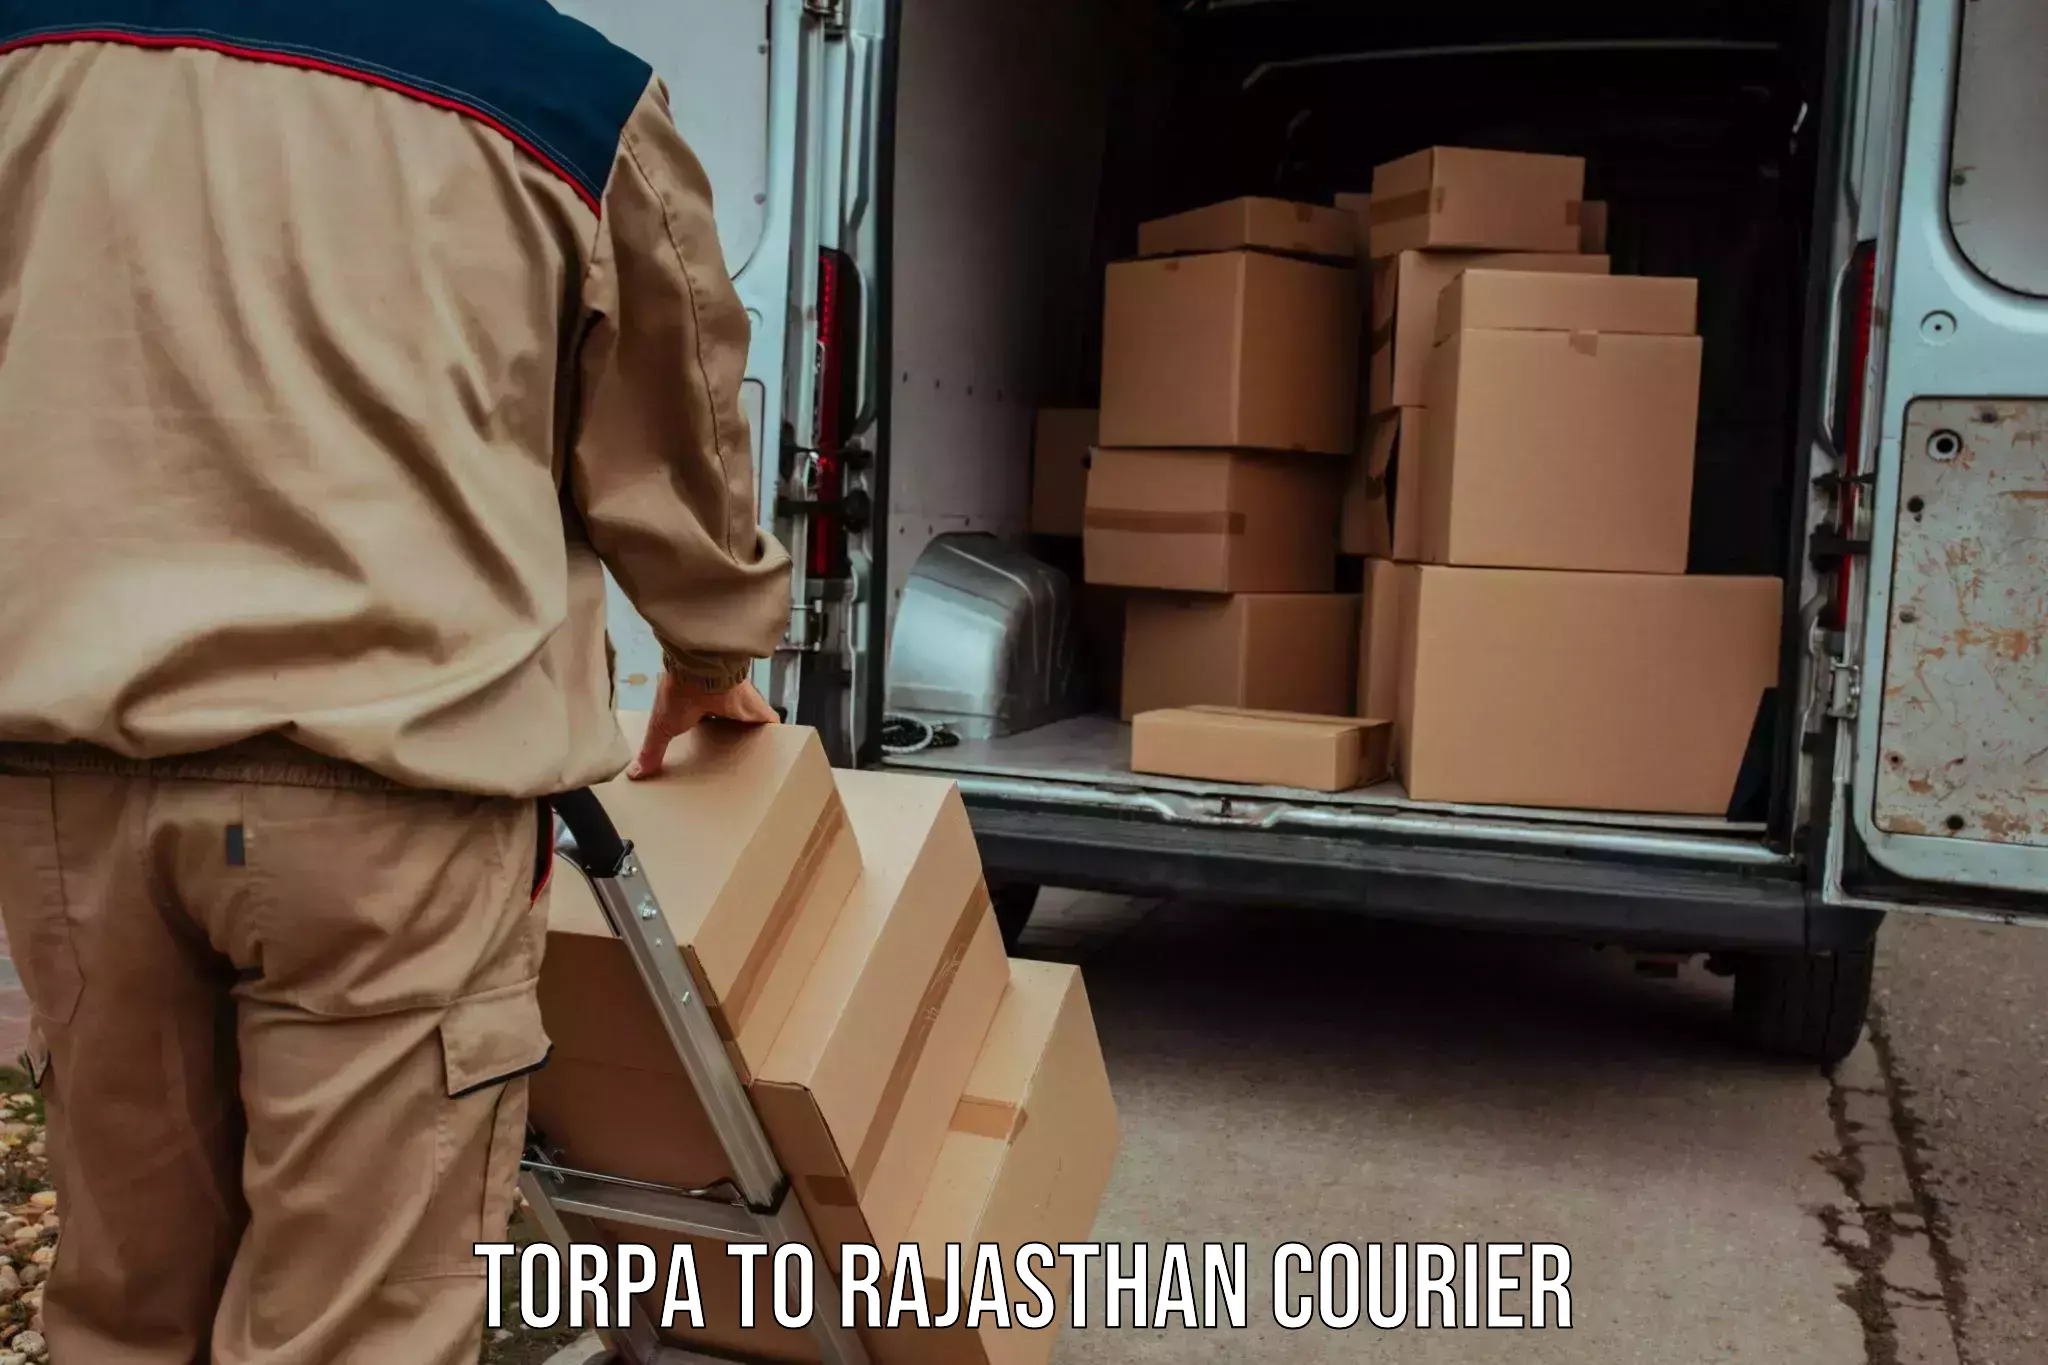 Easy access courier services Torpa to Jaipur